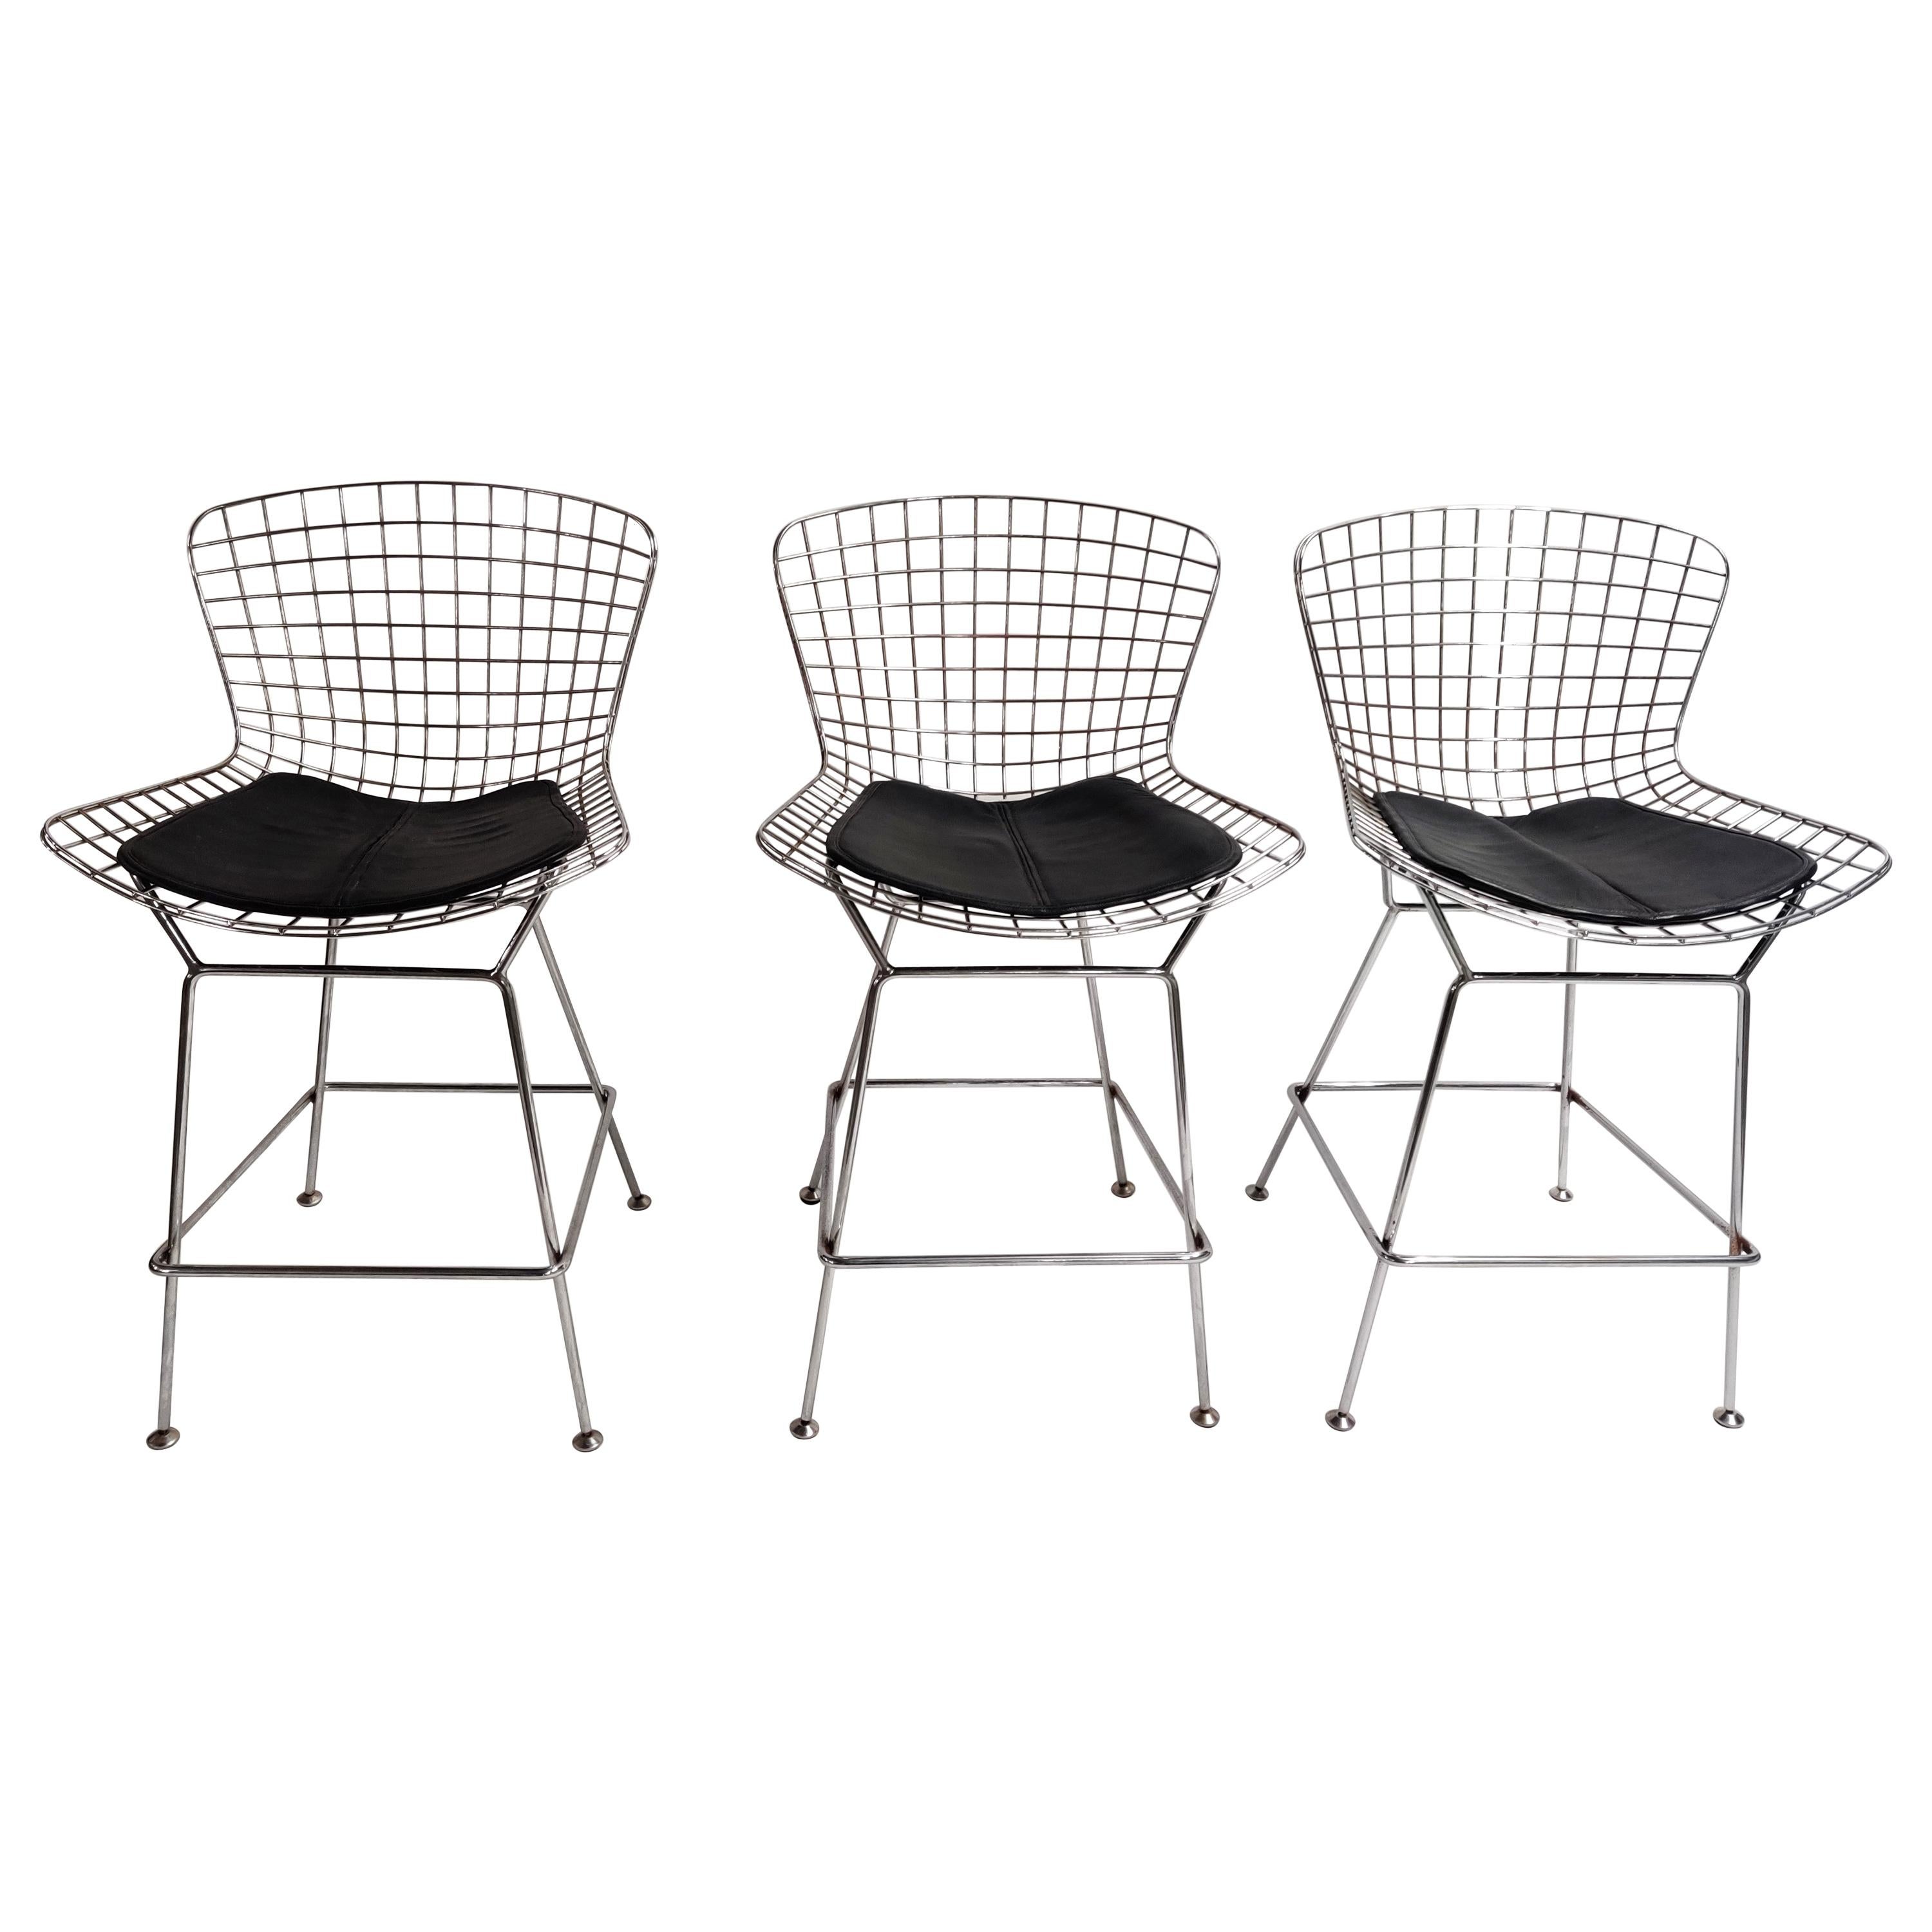 Set of 3 Vintage Chrome Wire Bar Stools, 1980s